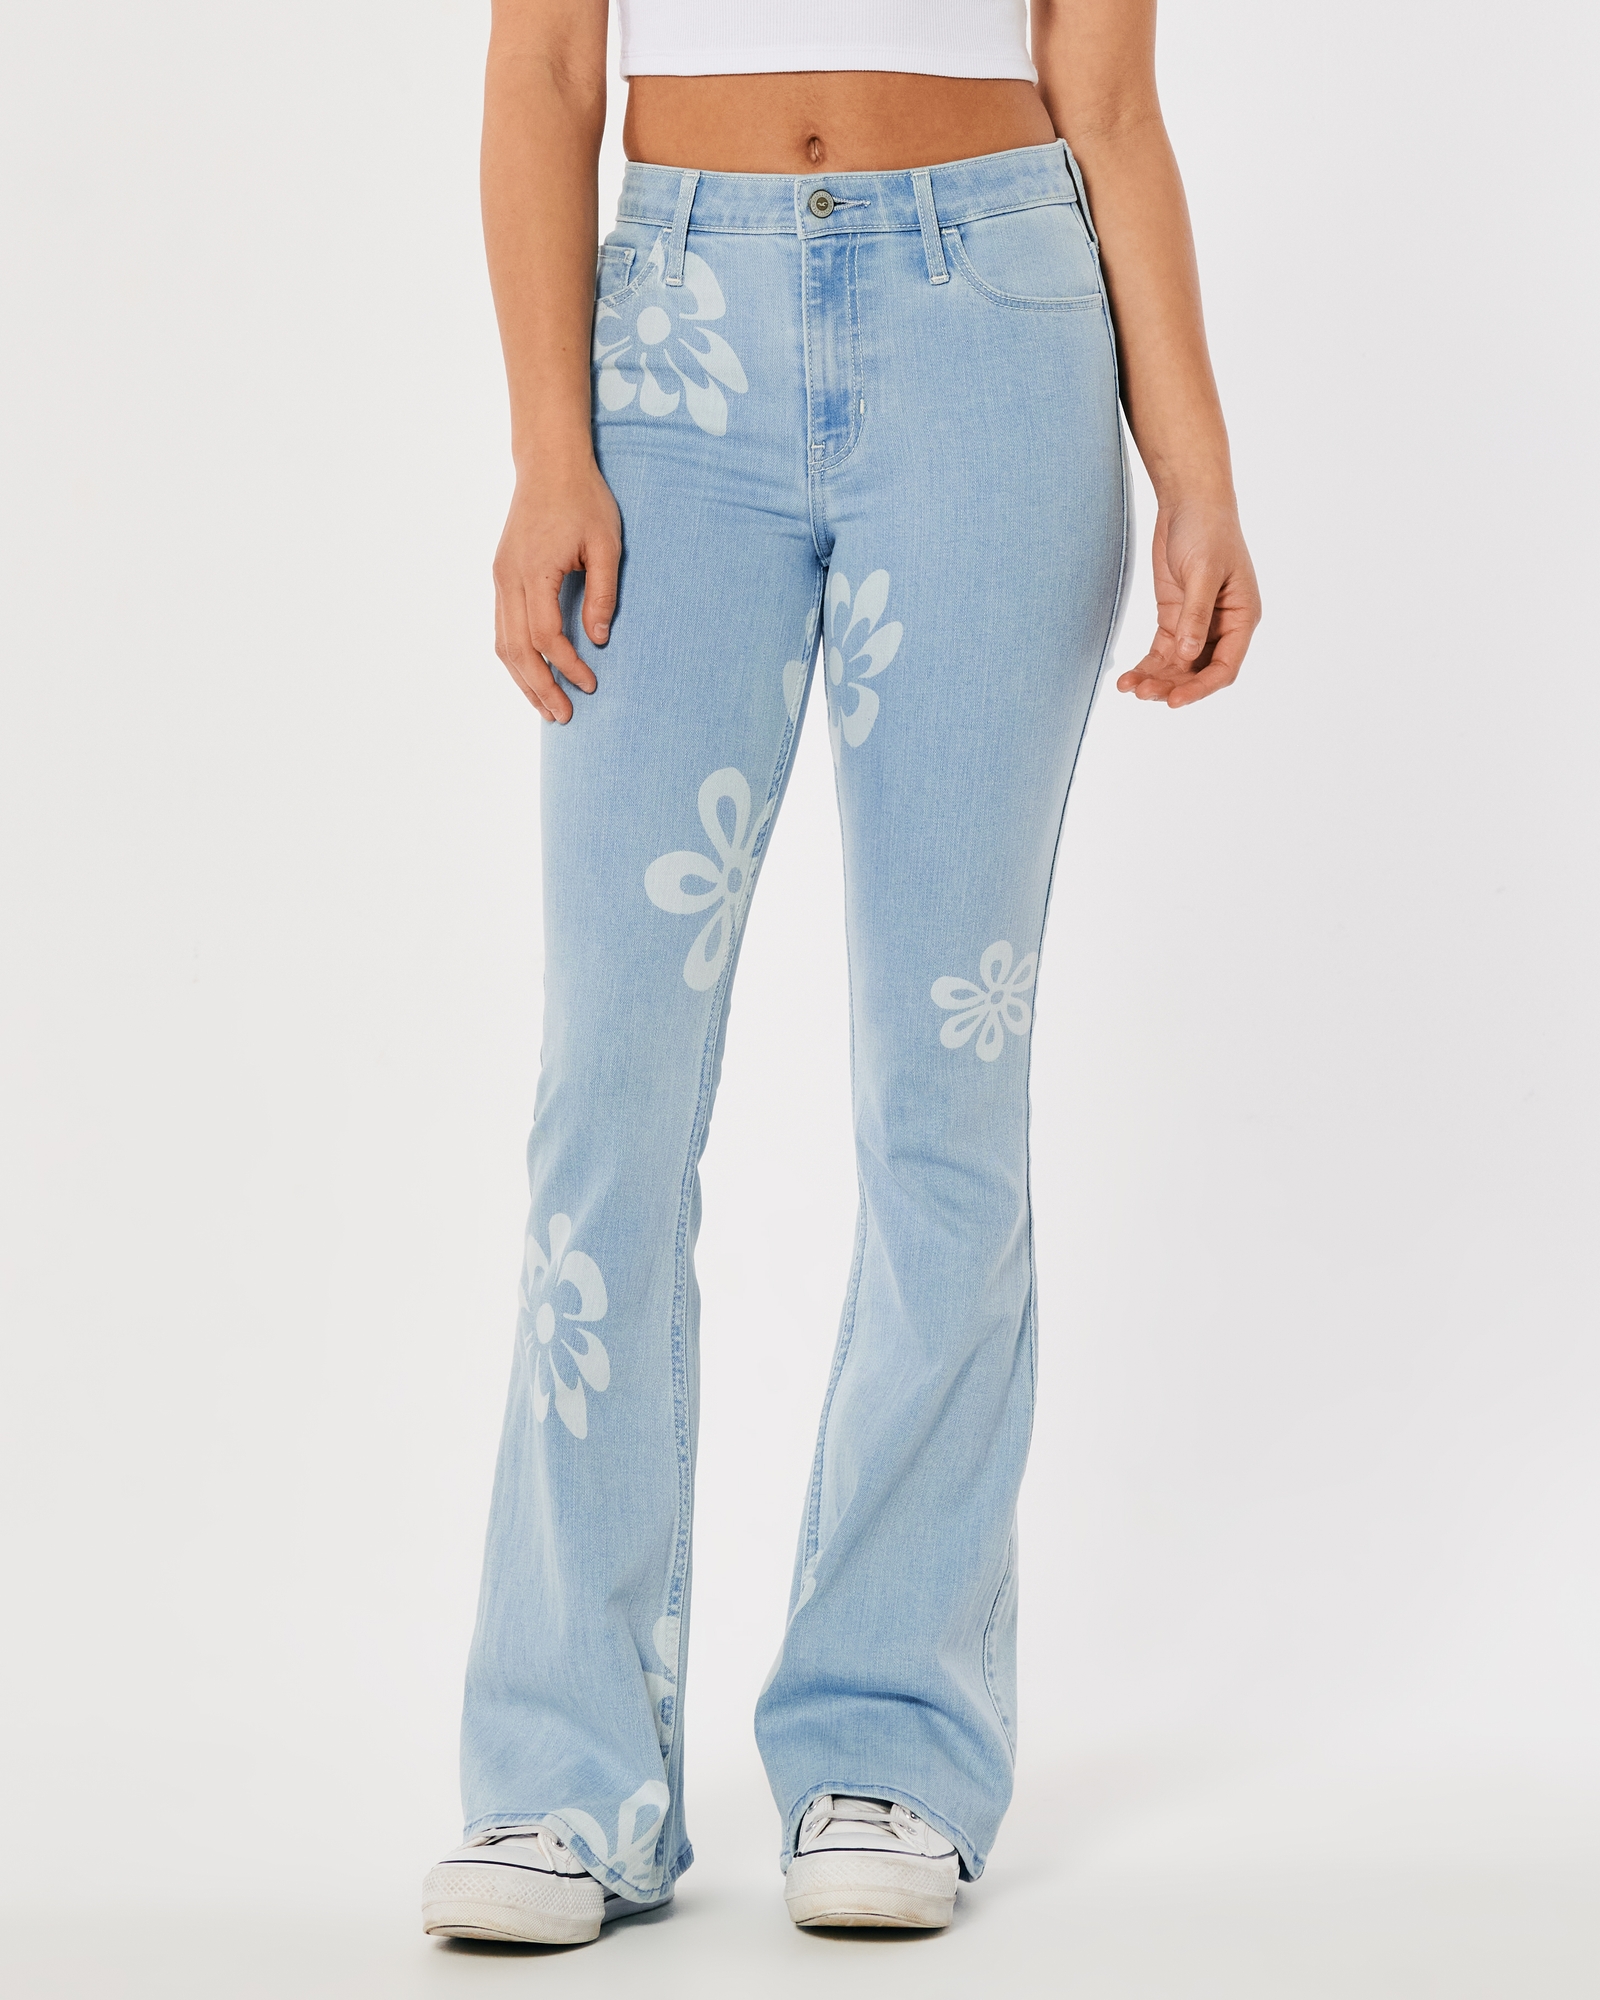 Floral Embroidery Flare Jeans  Women's bell bottom jeans, Flare jeans,  Womens fashion vintage